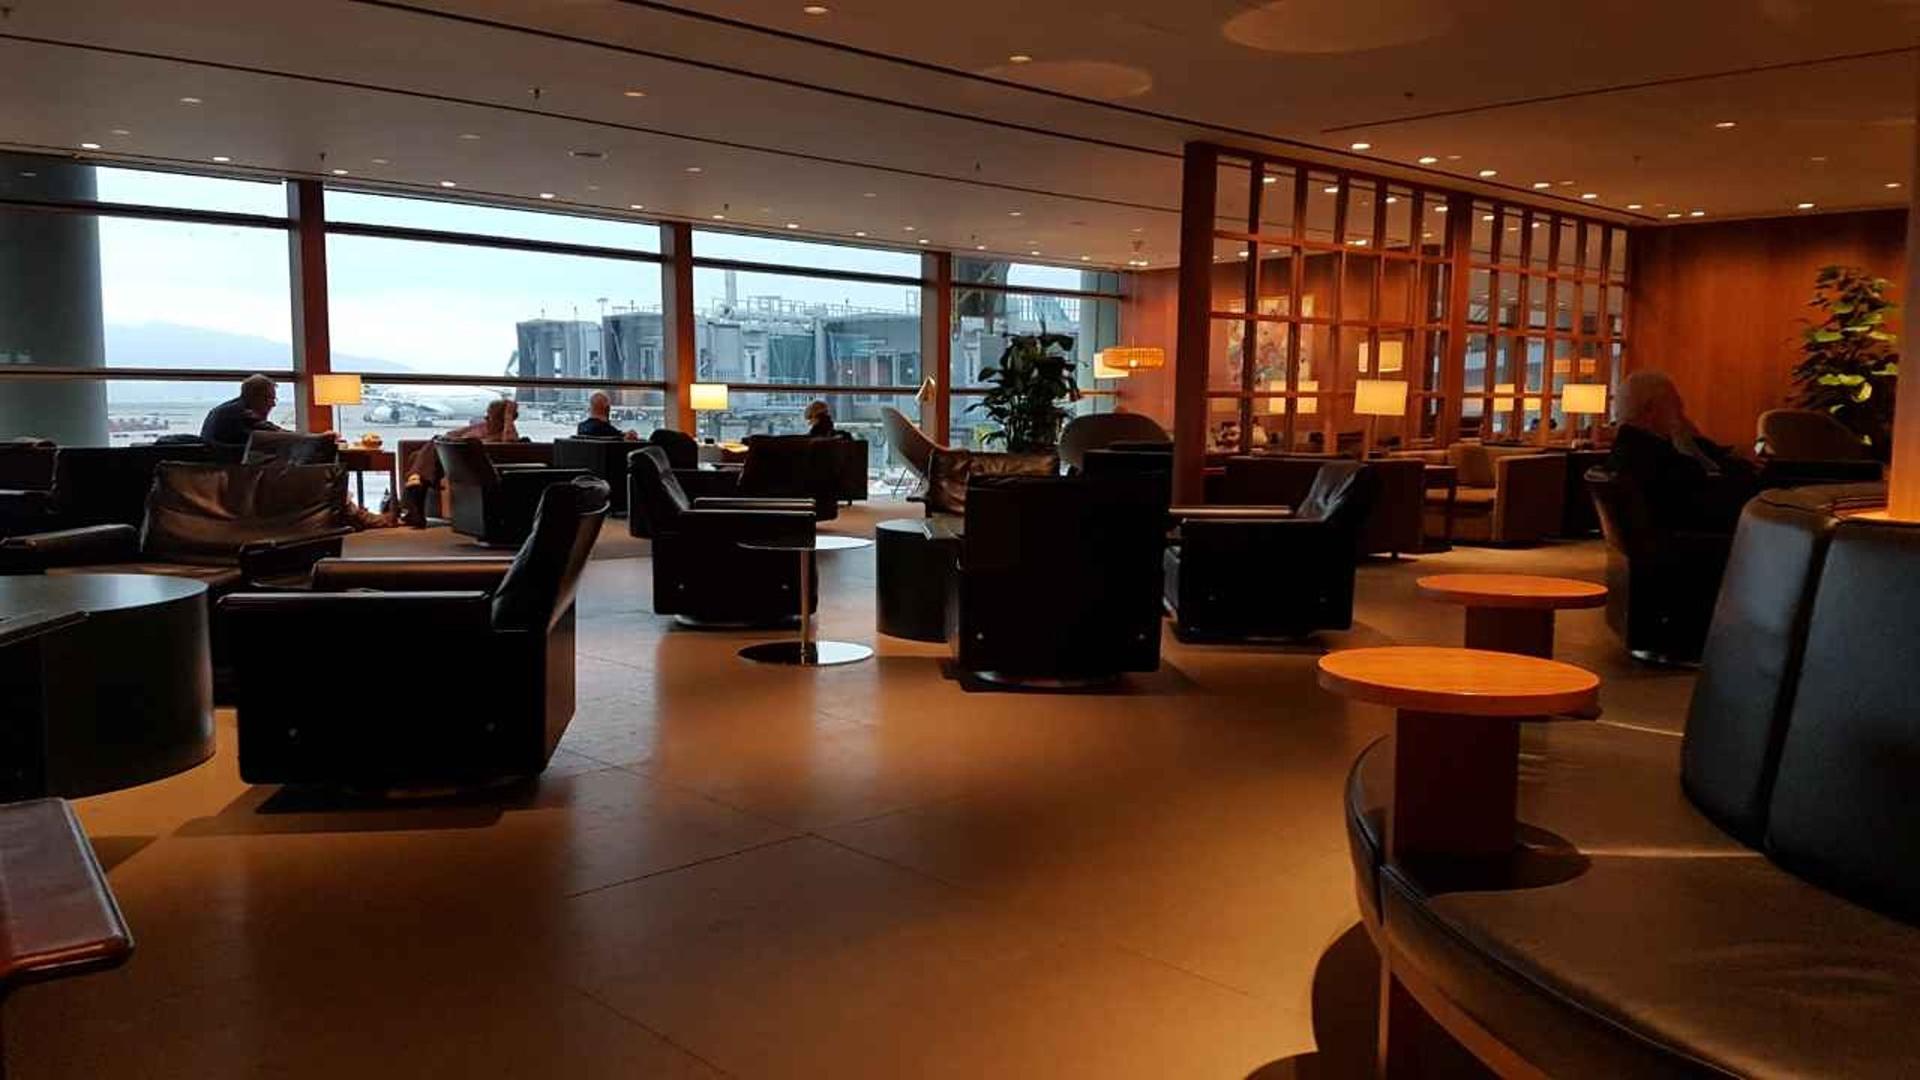 Cathay Pacific The Pier Business Class Lounge image 18 of 61